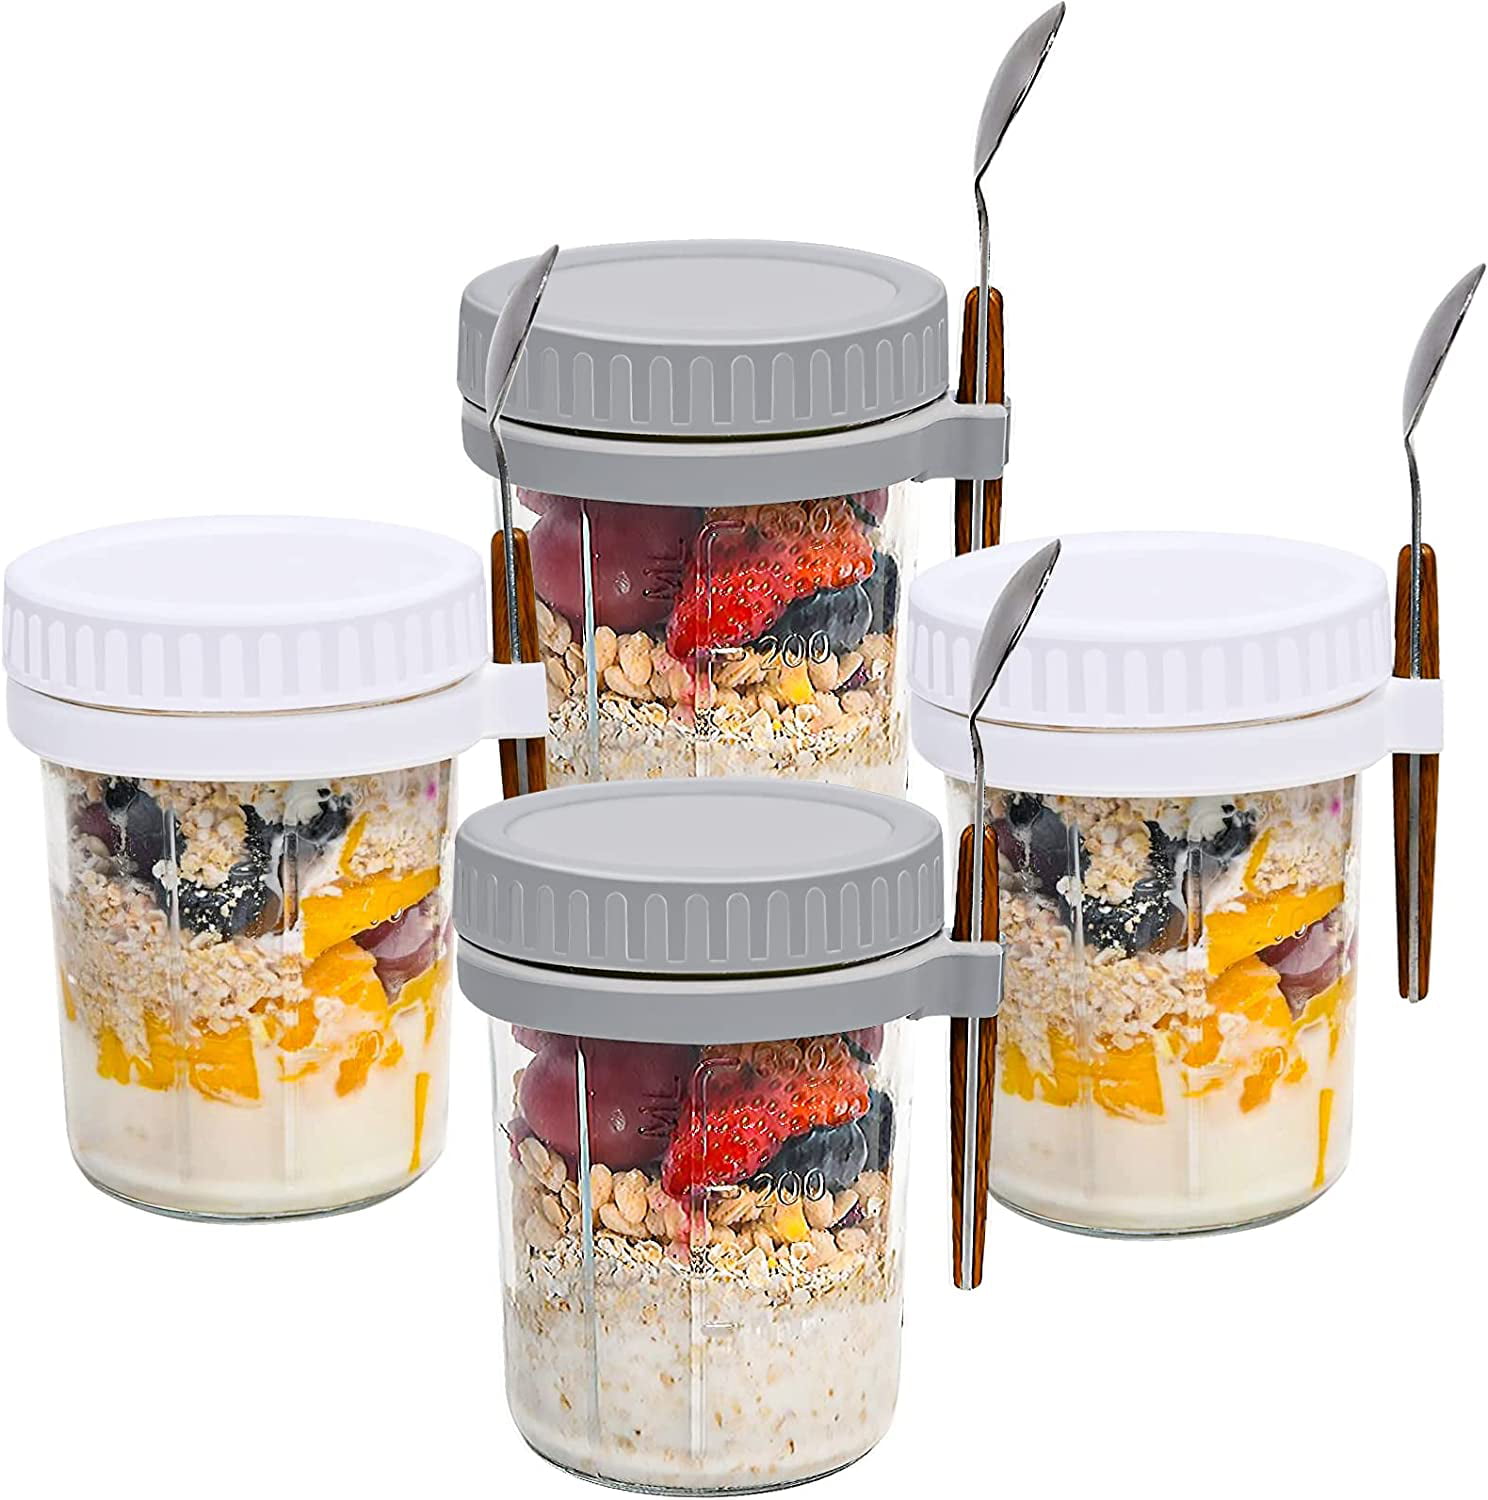 Mason Jars for Overnight Oats: 4 Pack Overnight Oats Containers with ...